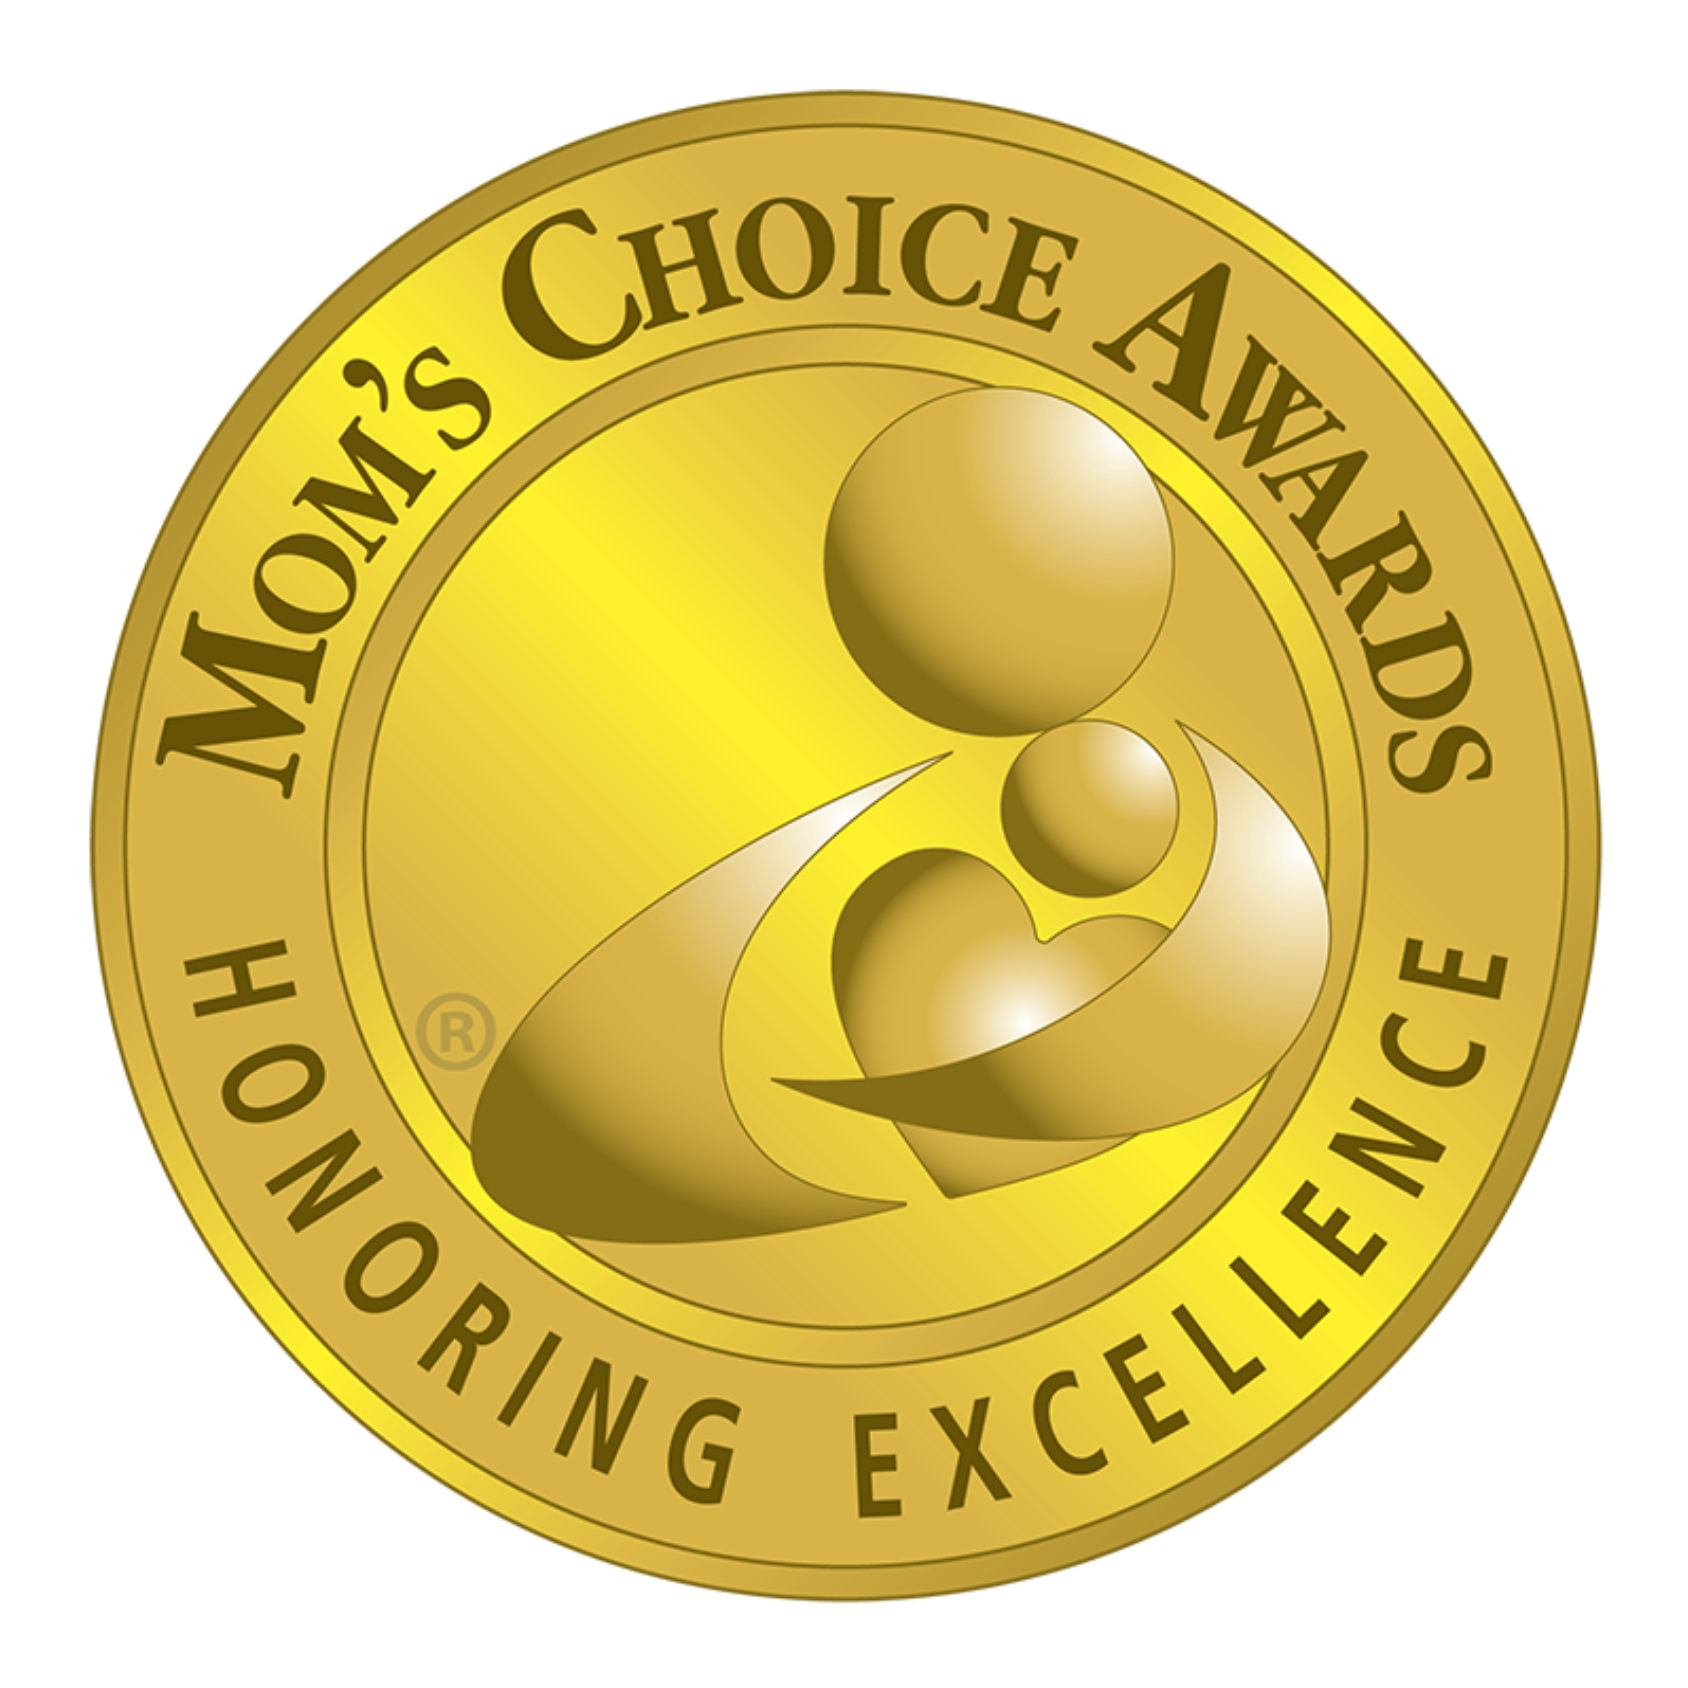 Golden seal emblem for "mom's choice awards" featuring an abstract representation of a mother and child, symbolizing excellence in inclusion honored by maternal approval.